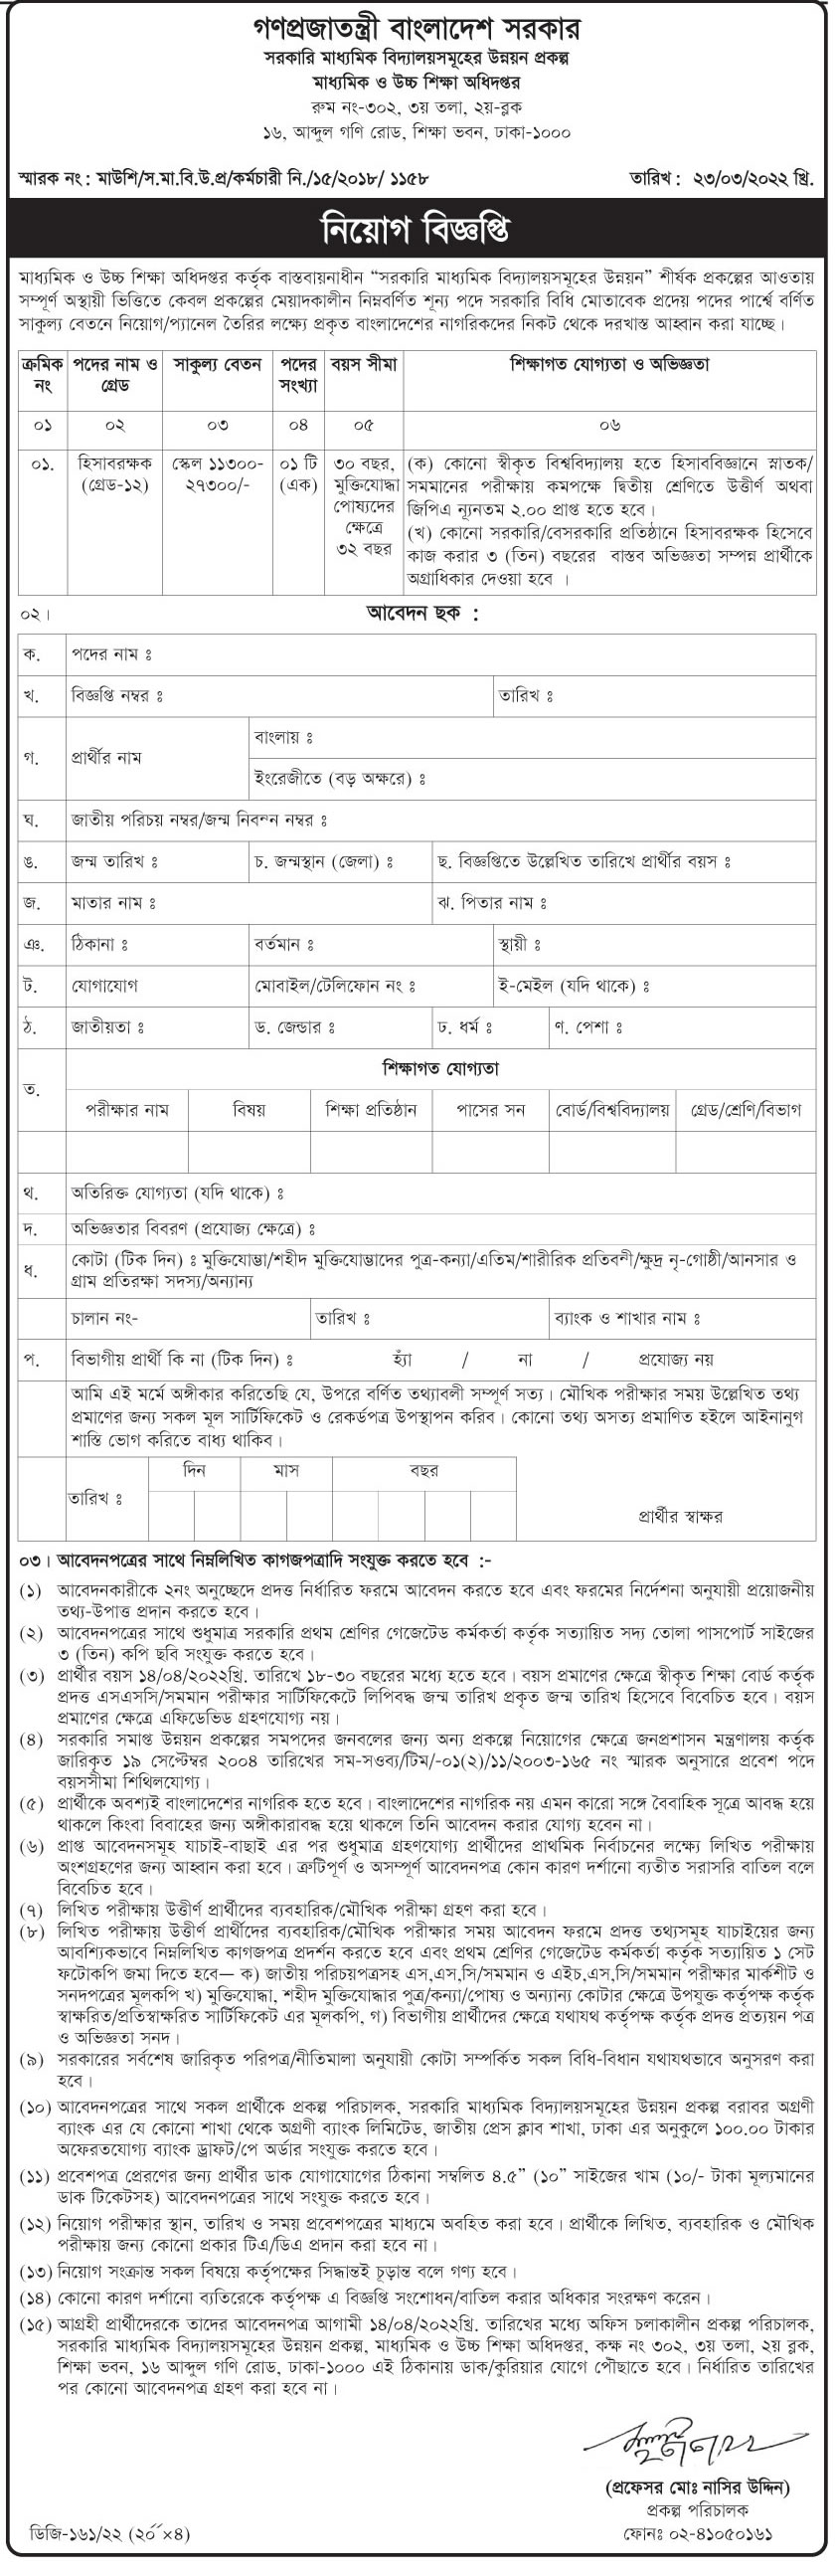 Directorate of Secondary and Higher Education DSHE Job Circular 2022